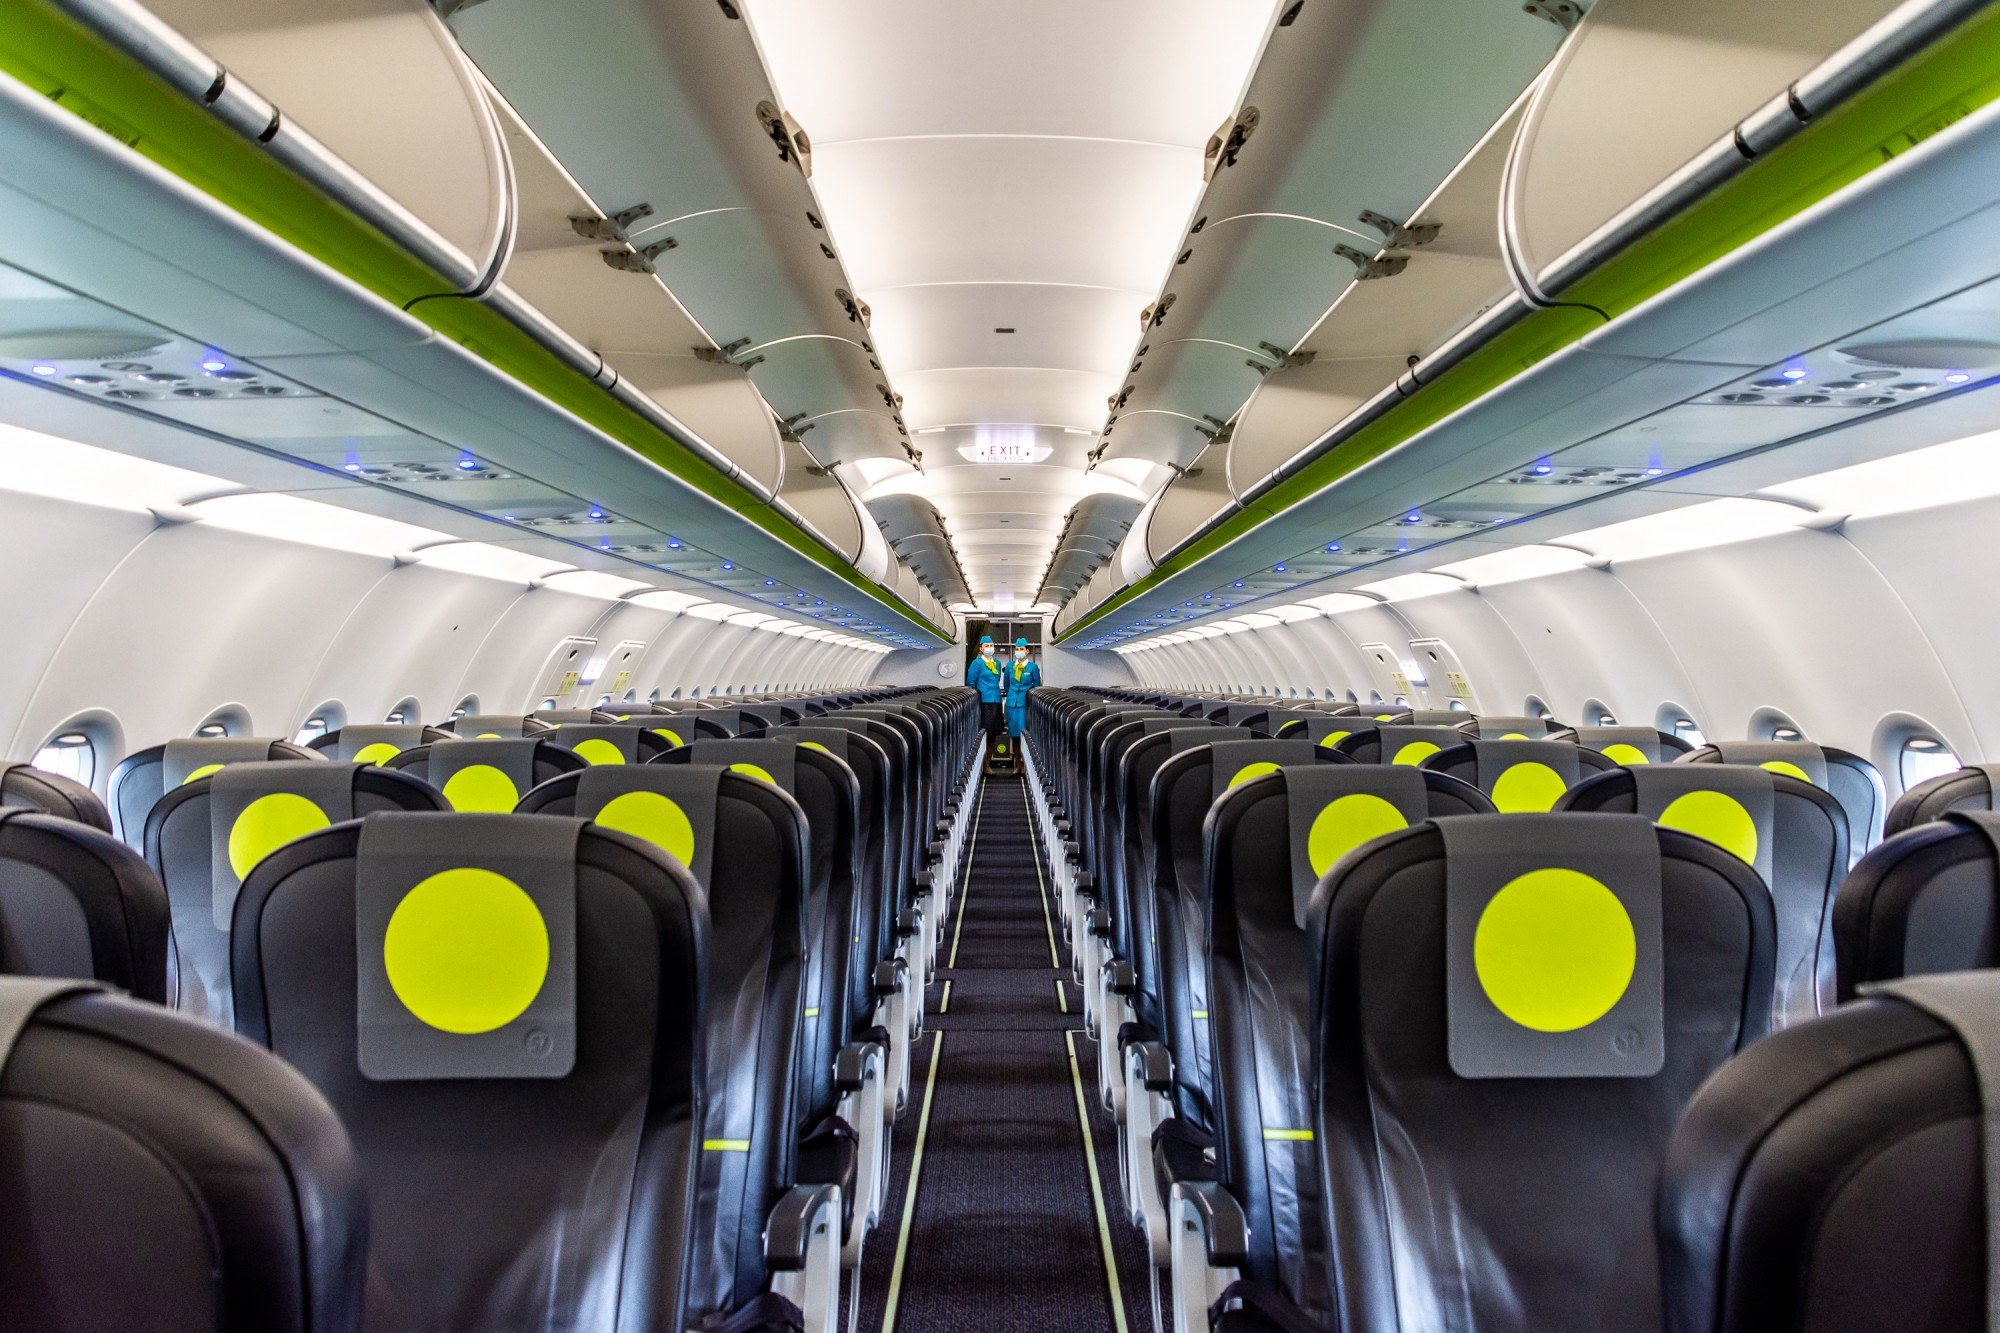 S7 airlines ручная. A320neo s7 салон. Аэробус а320 s7 салон. Самолёт Аэробус а320 Нео s7 салон. Самолёт Embraer 170 s7 салон.